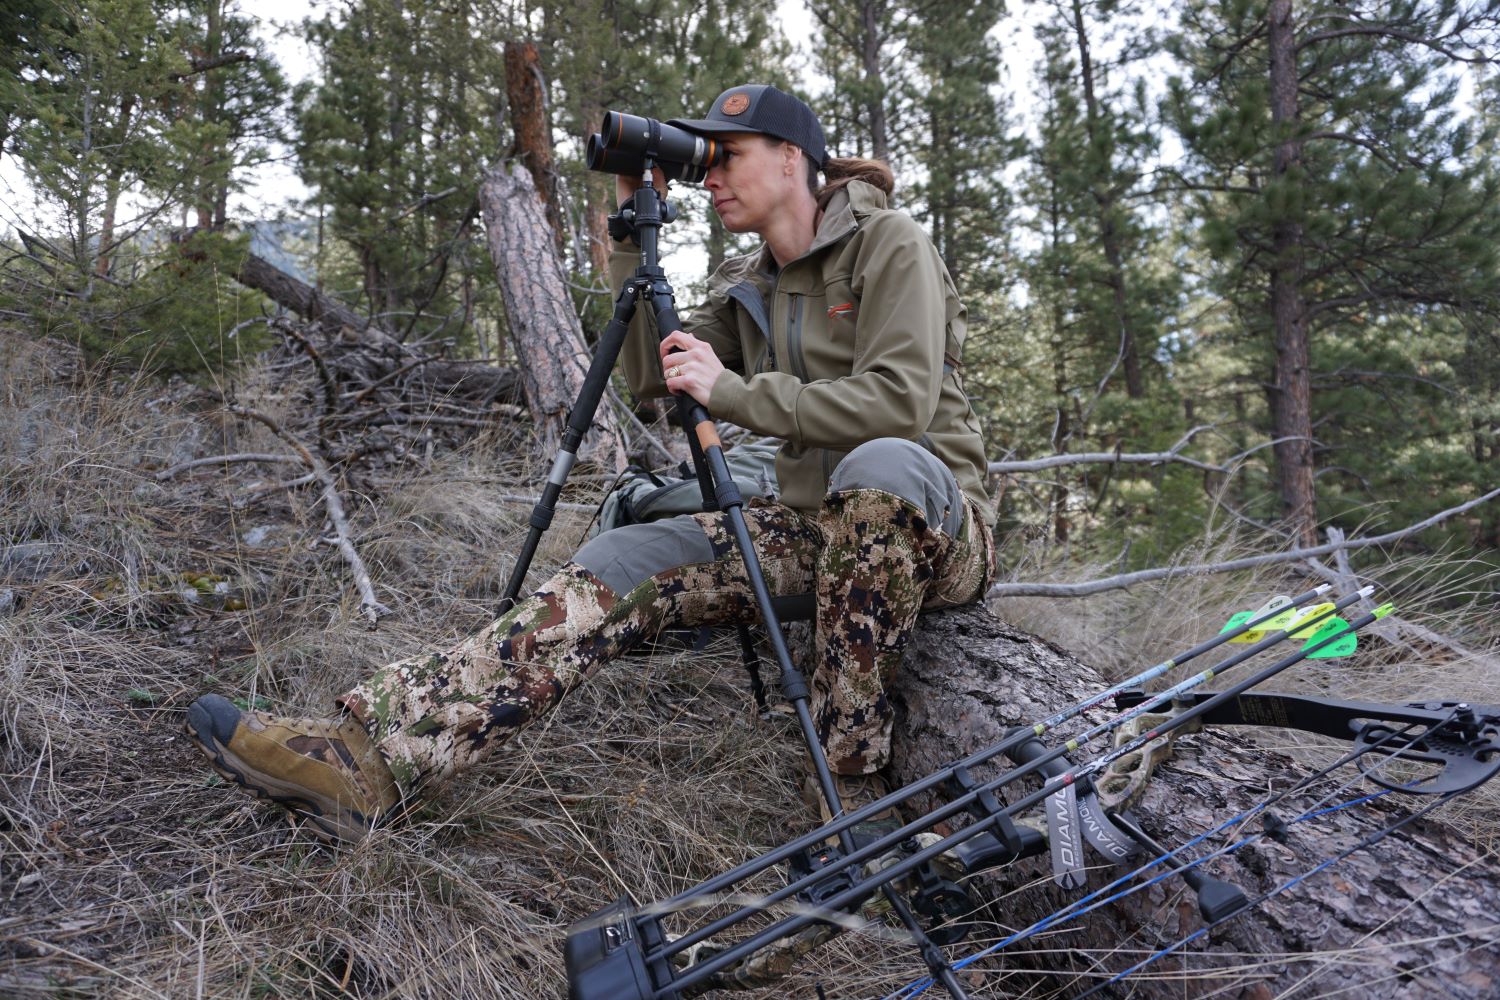 The author’s wife uses binoculars with Ascent tripod for archery hunt